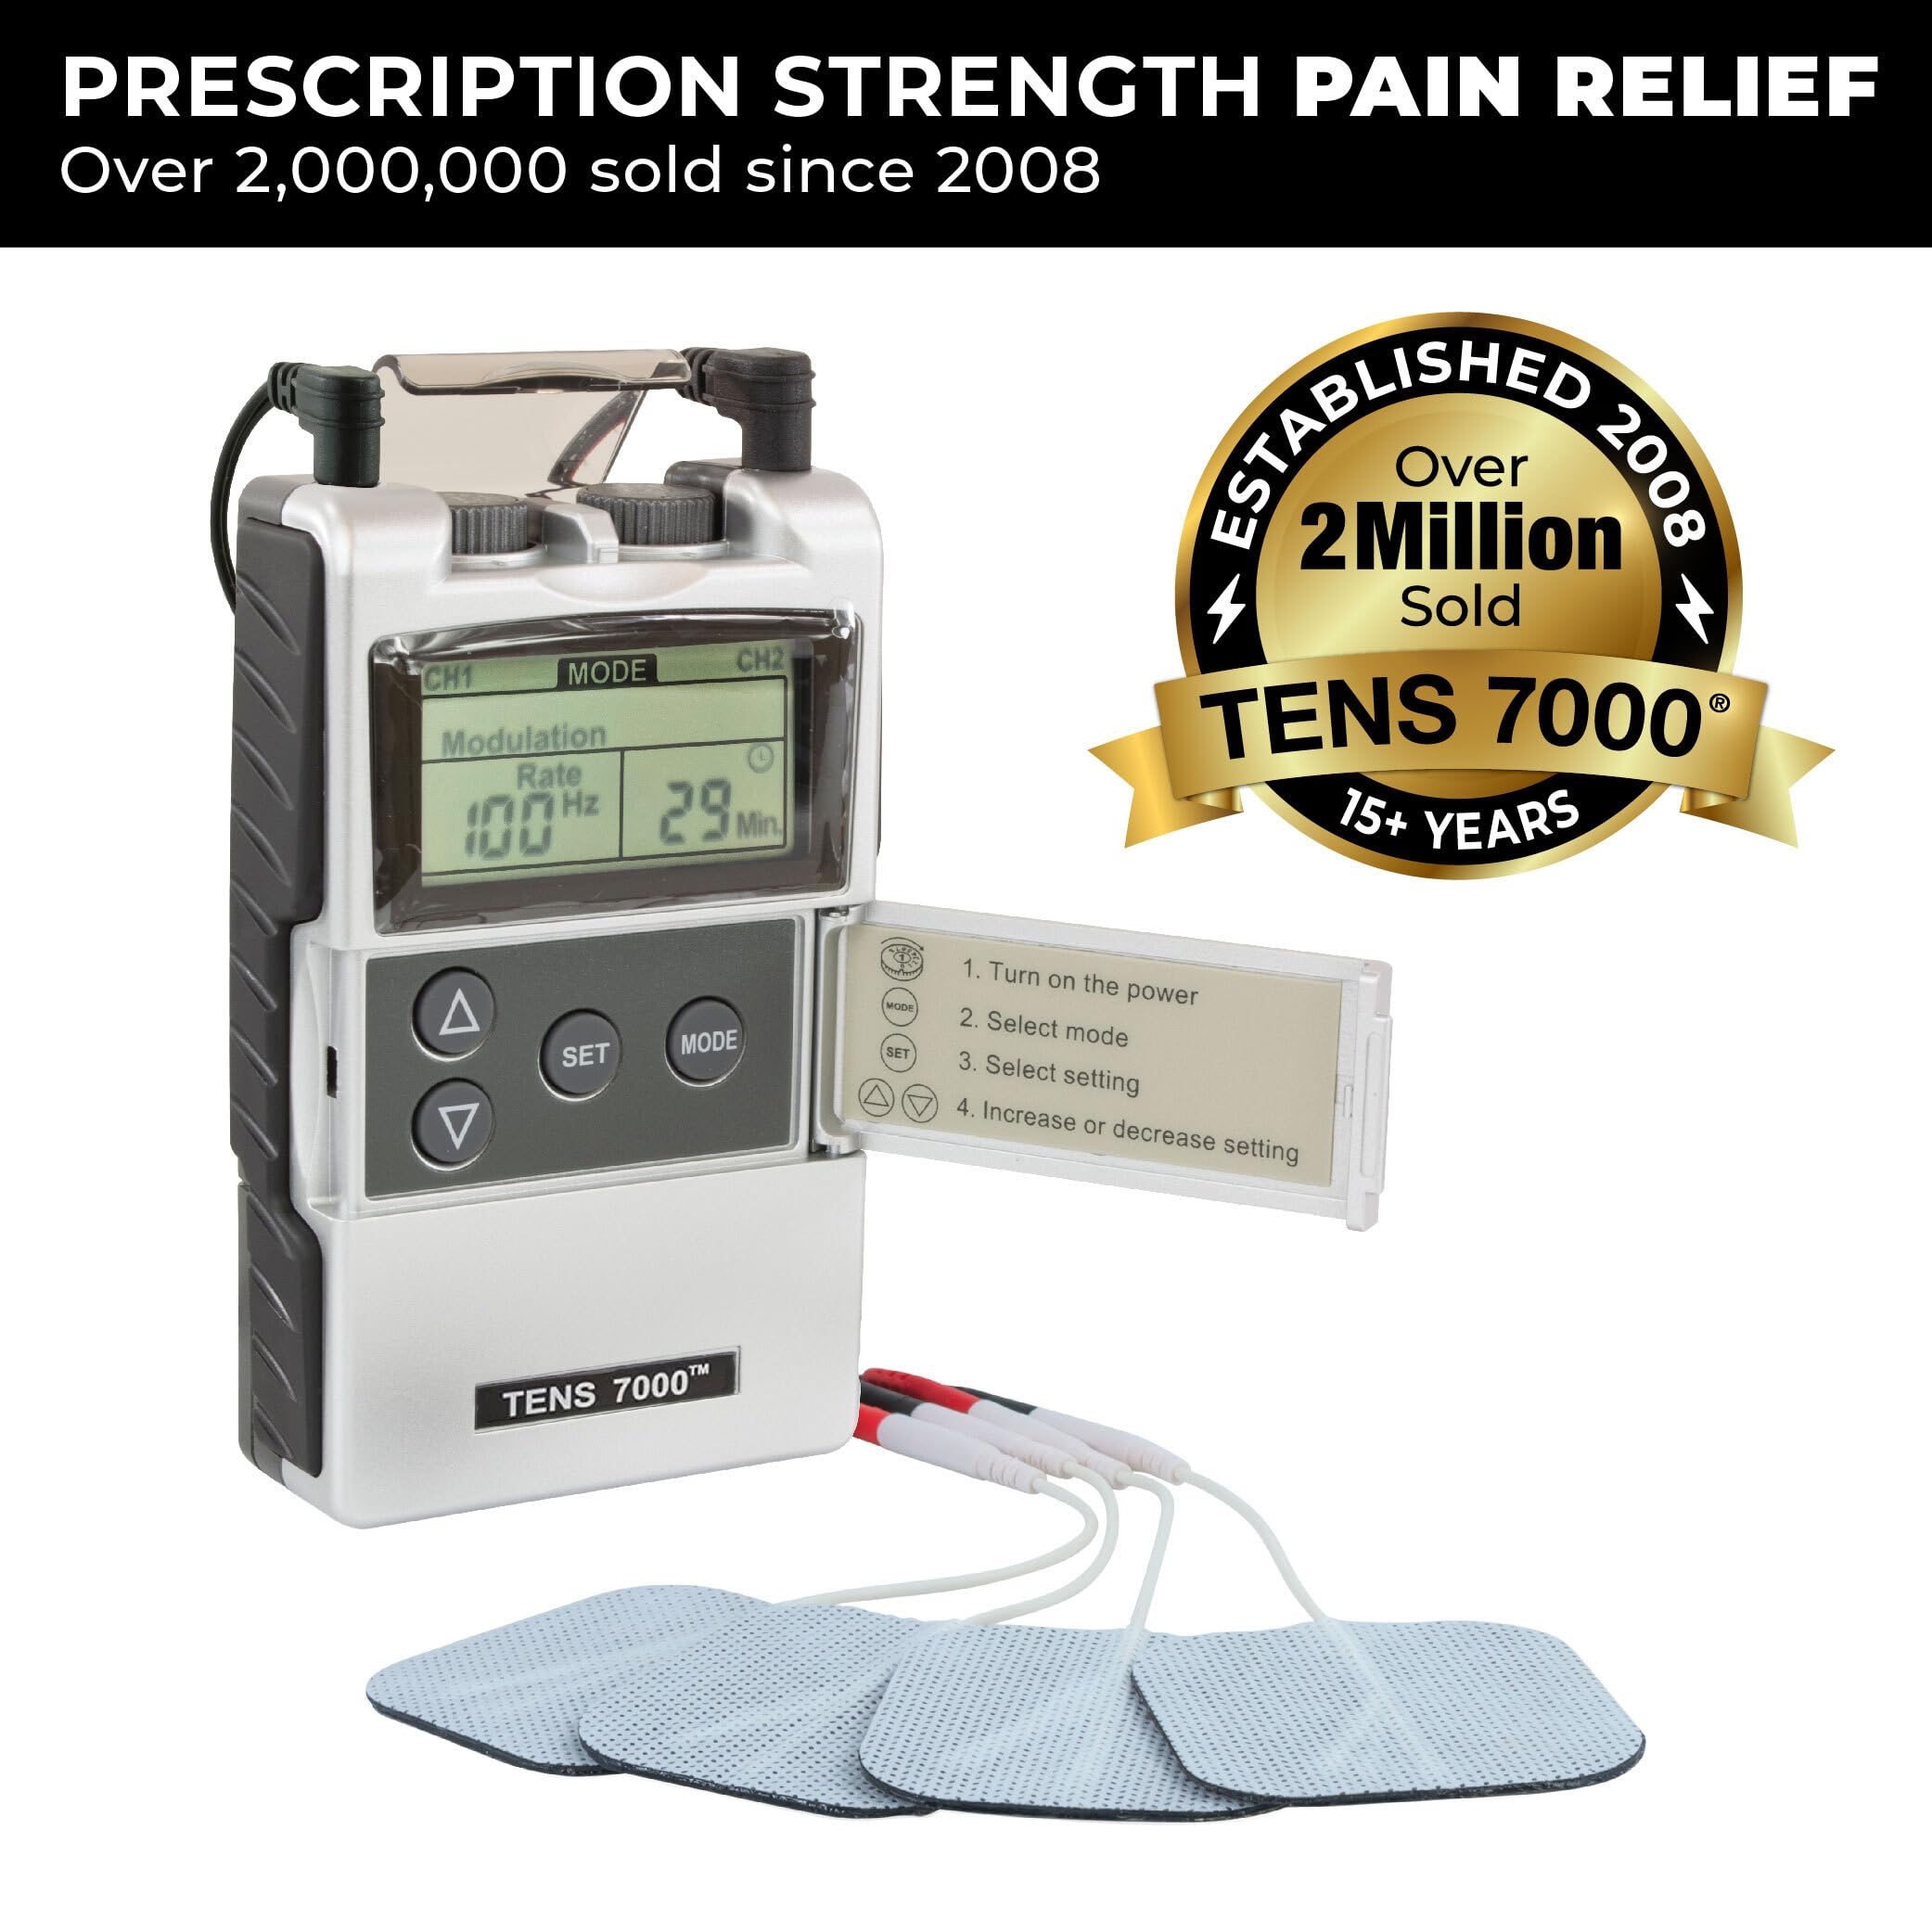 TENS 7000 Digital TENS Unit with Accessories and 48 Electrode Pads - TENS Unit Muscle Stimulator for Back Pain Relief, General Pain Relief, Neck Pain, Sciatica Pain Relief, Nerve Pain Relief